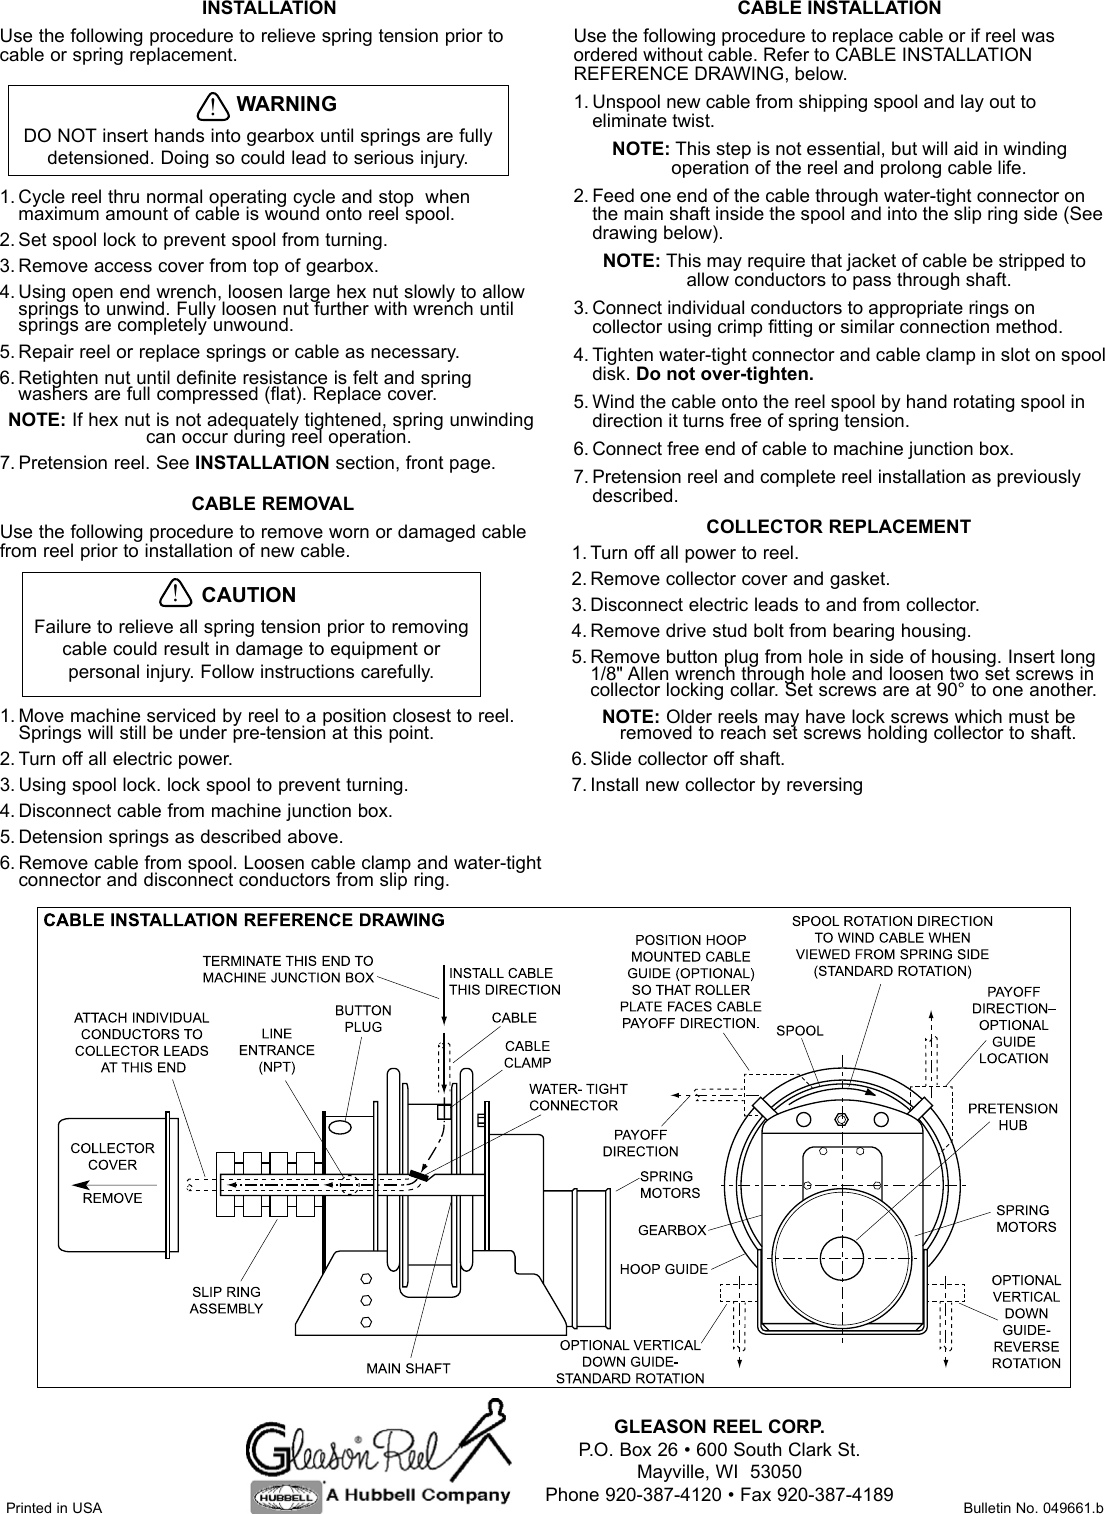 Hubbell Gear Drive Electric Cable Reels Sm21 Users Manual